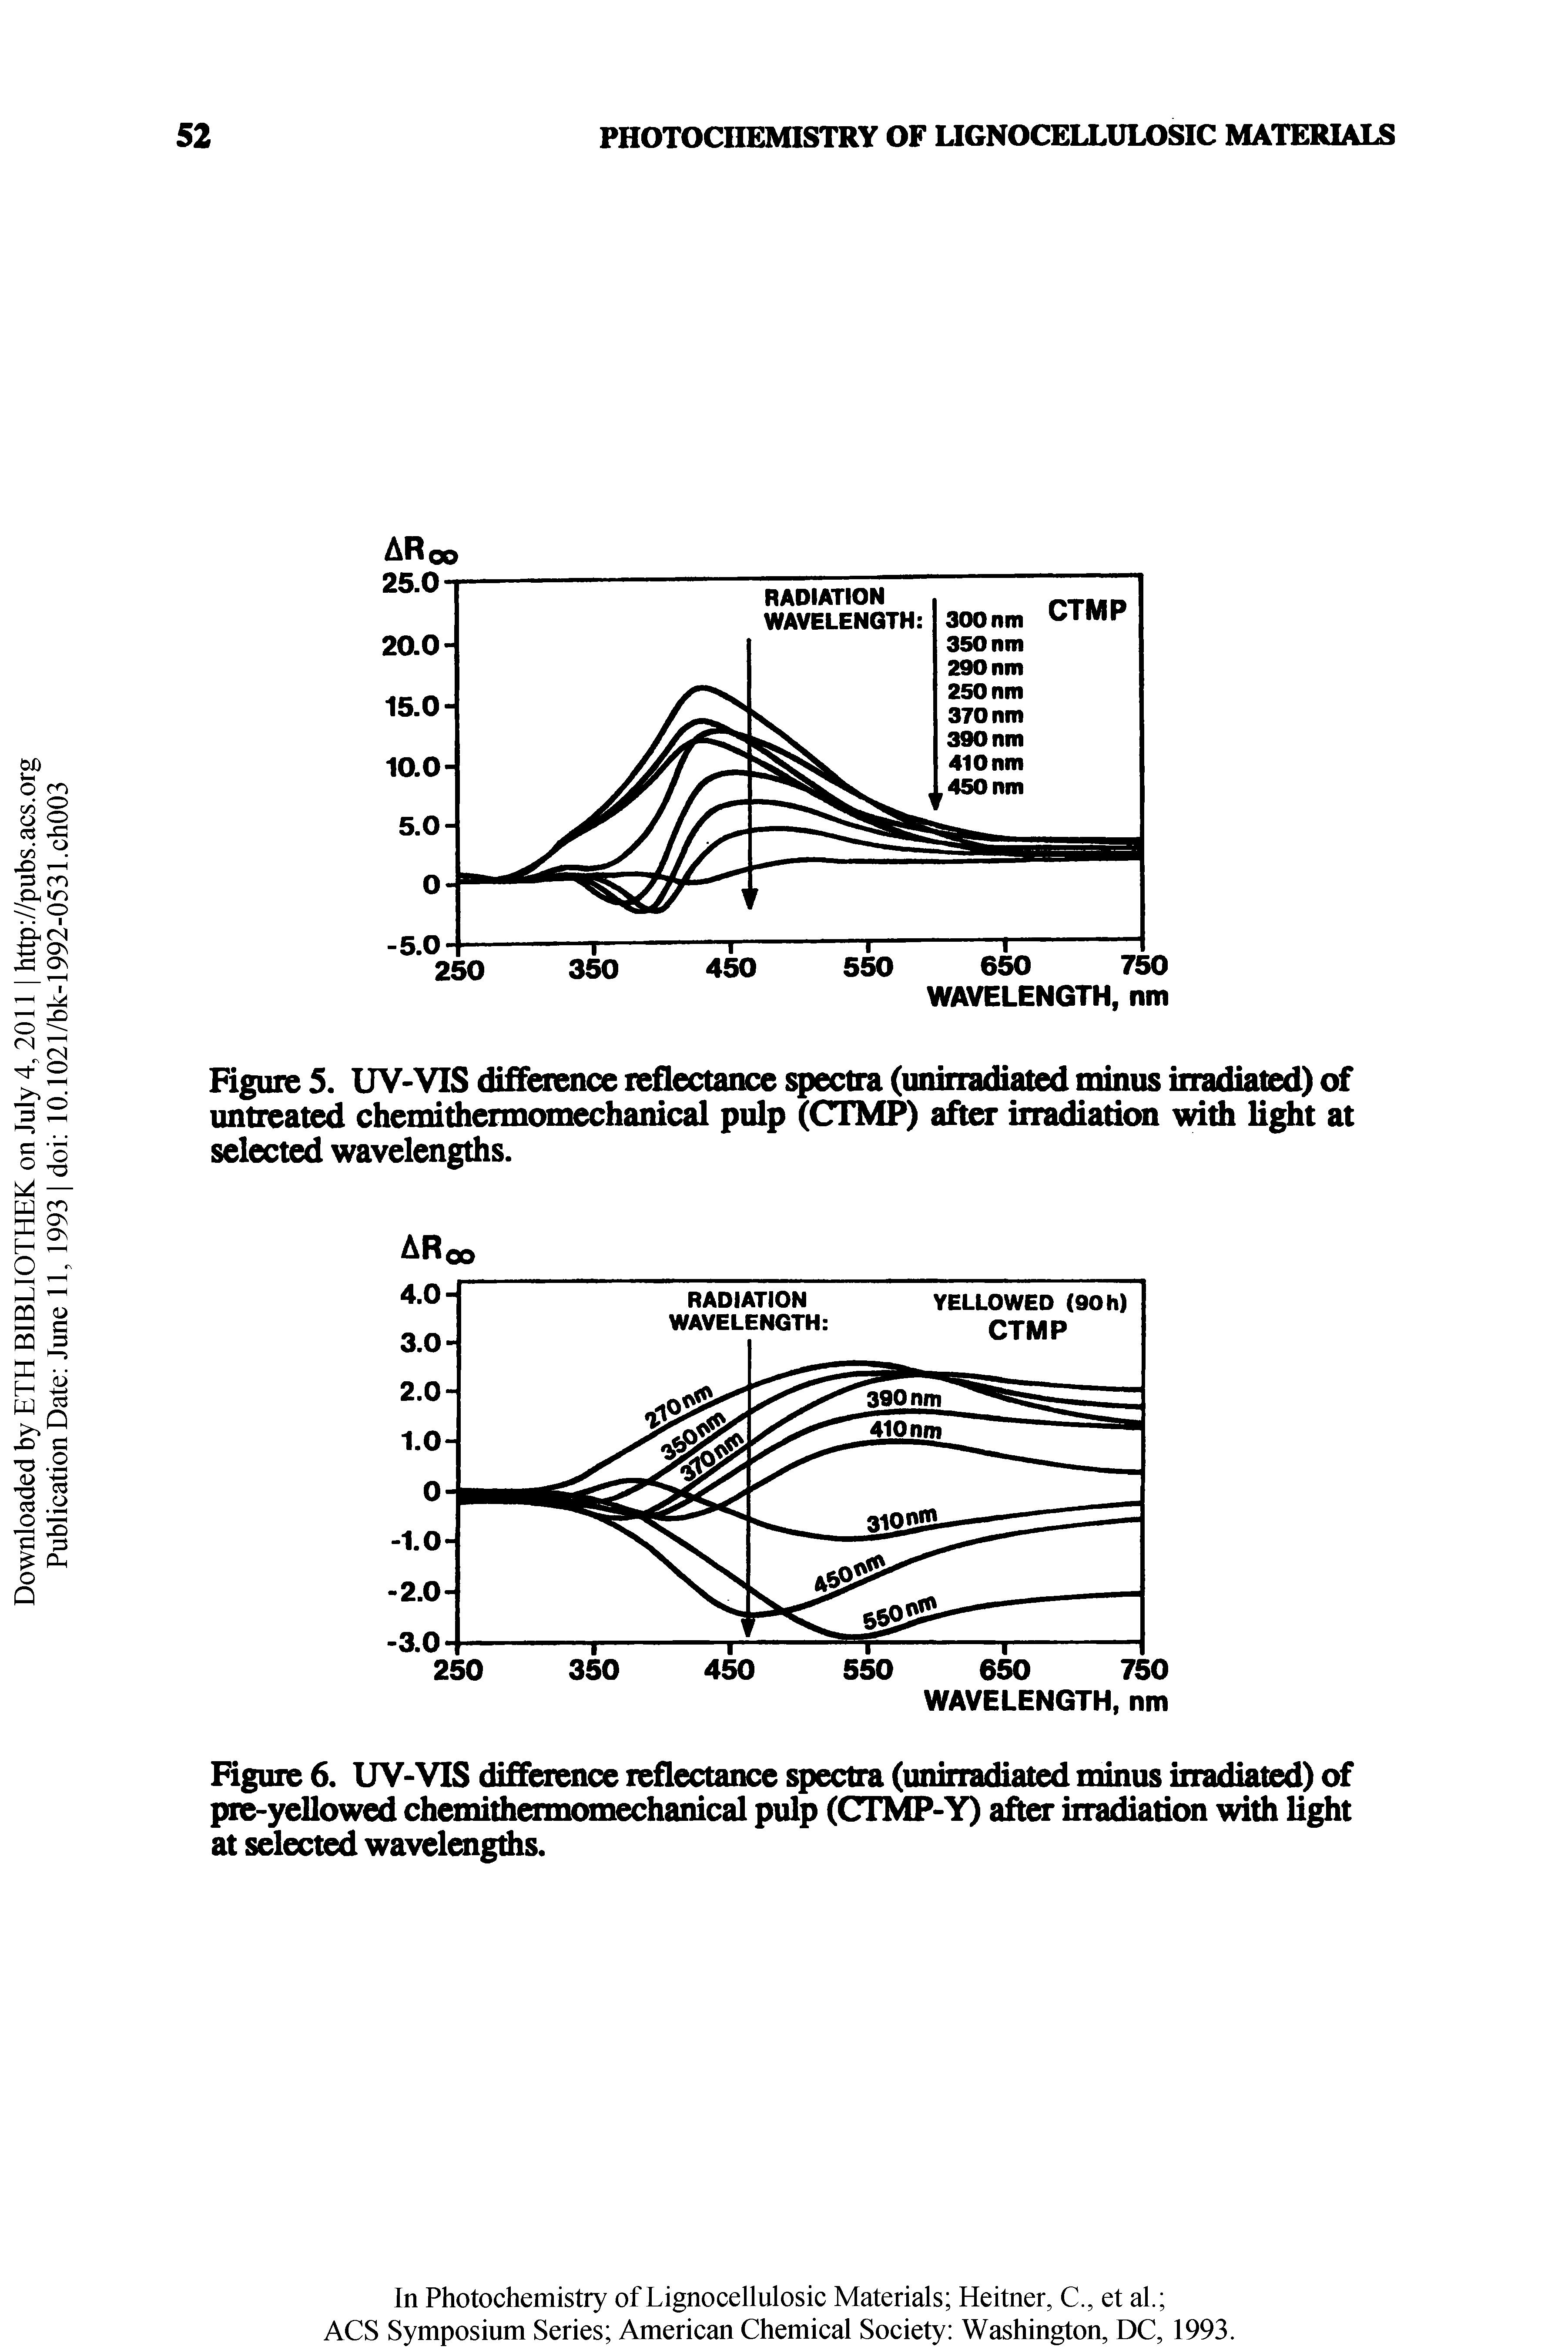 Figure 5. UV-VIS difference reflectance spectra (unirradiated minus irradiated) of untreated chemithermomechanical pulp (CTMP) after irradiation with light at selected wavelengths.